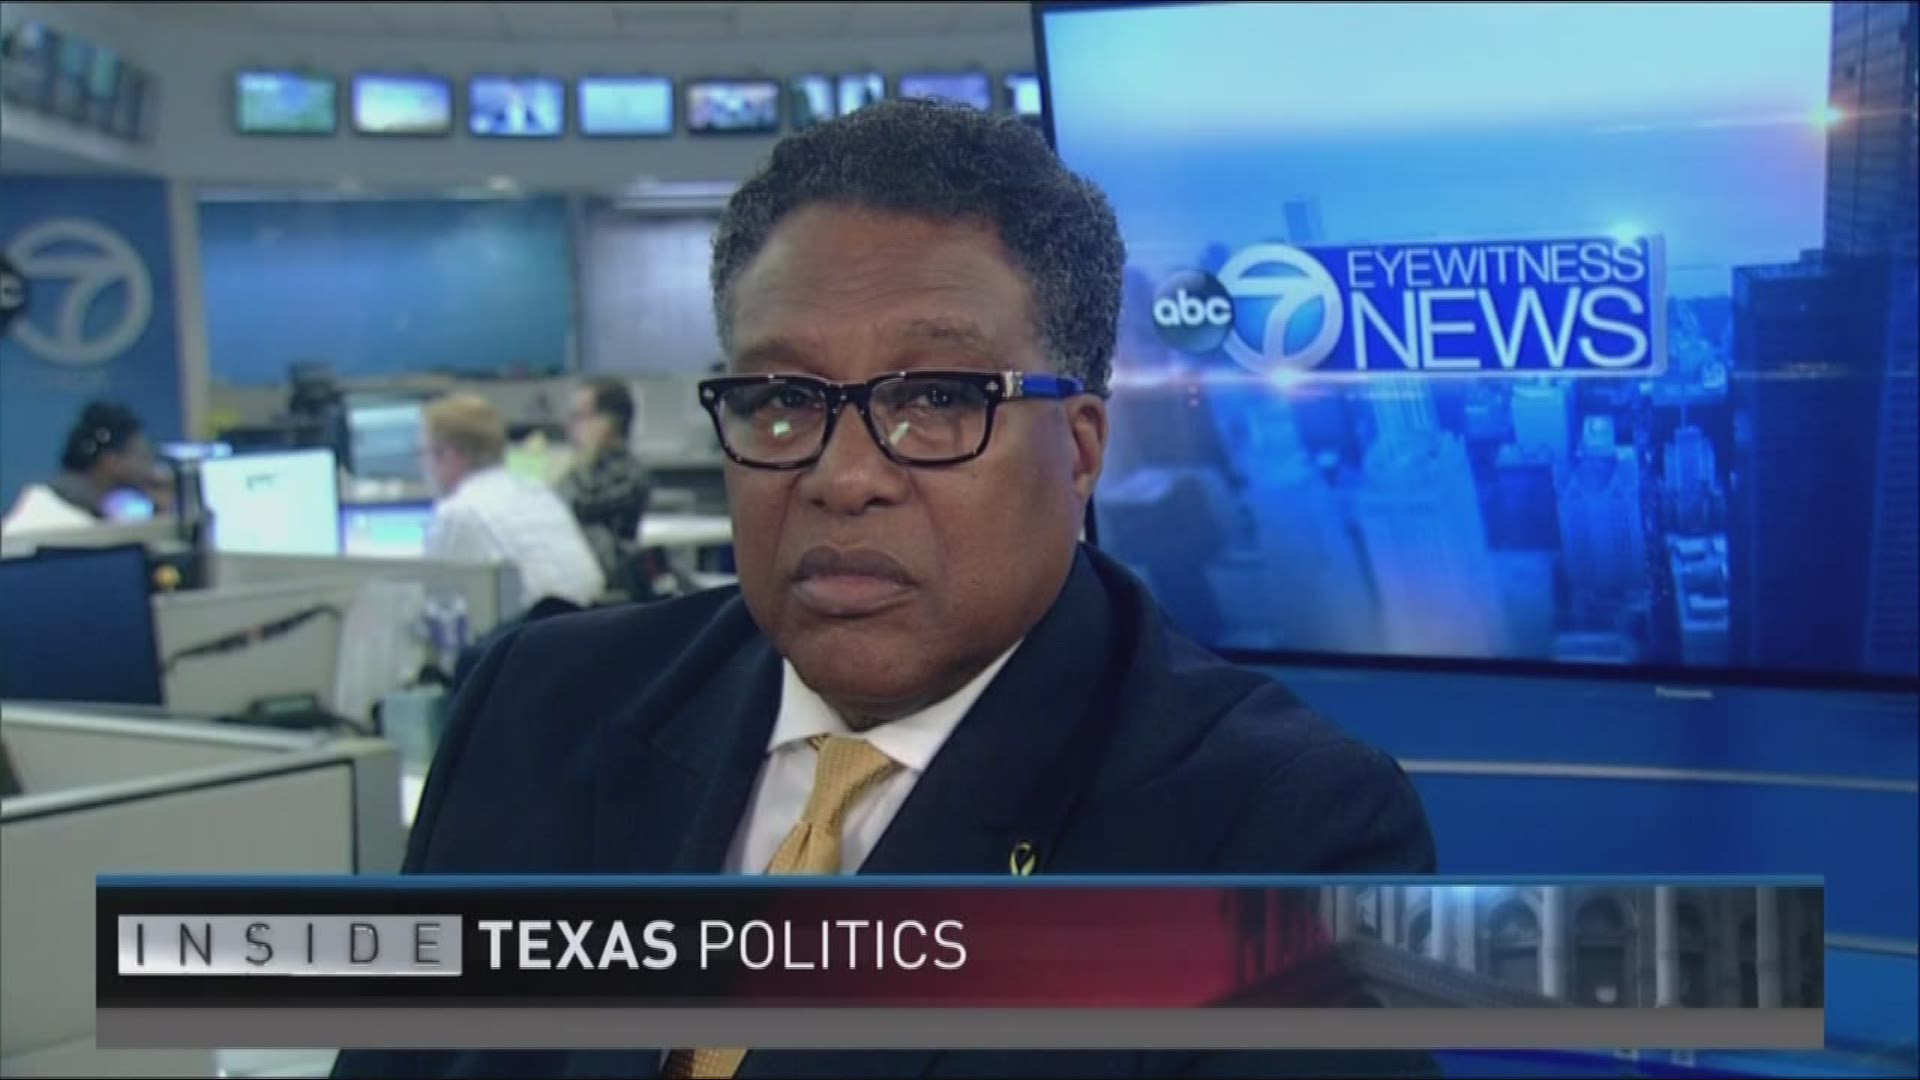 Inside Texas Politics began with the upcoming National Rifle Association convention to be held May 4-6 in Dallas. The annual convention is likely to bring controversy. Dallas Mayor Pro Tem Dwaine Caraway explained why he is against the event coming to Dal